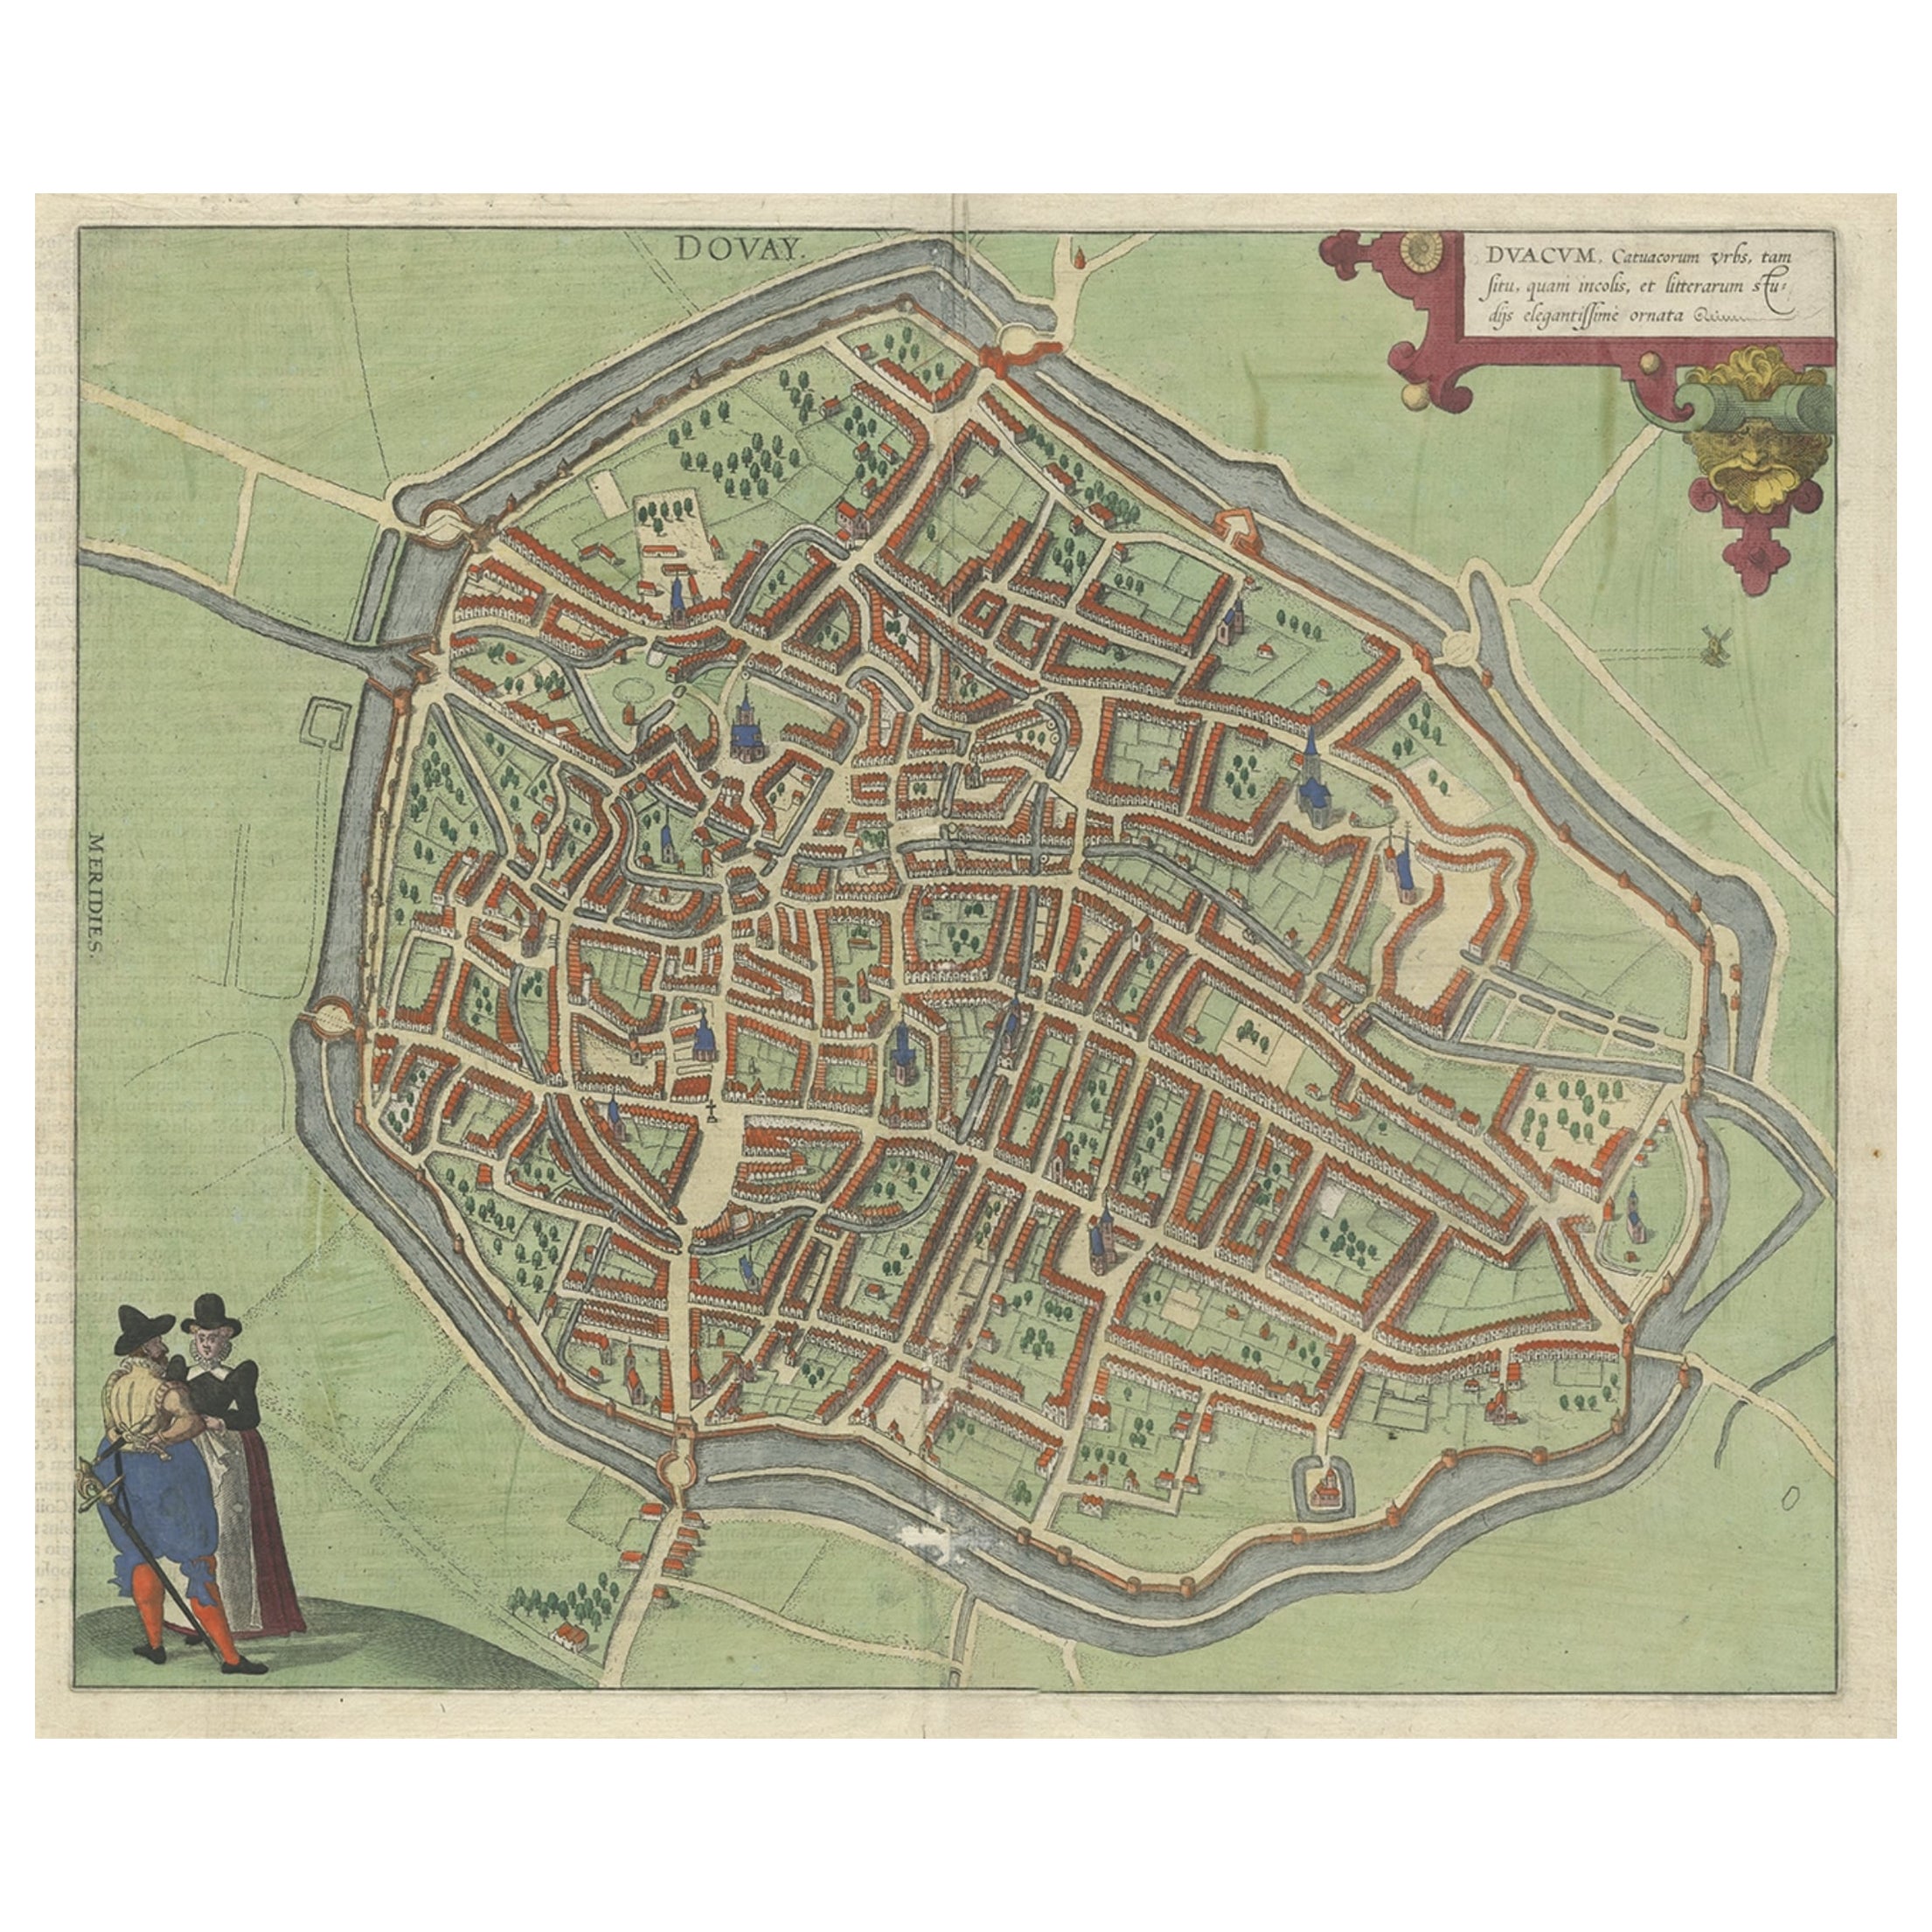 Very Old Original Antique Map of The City of Douai in France, ca.1575